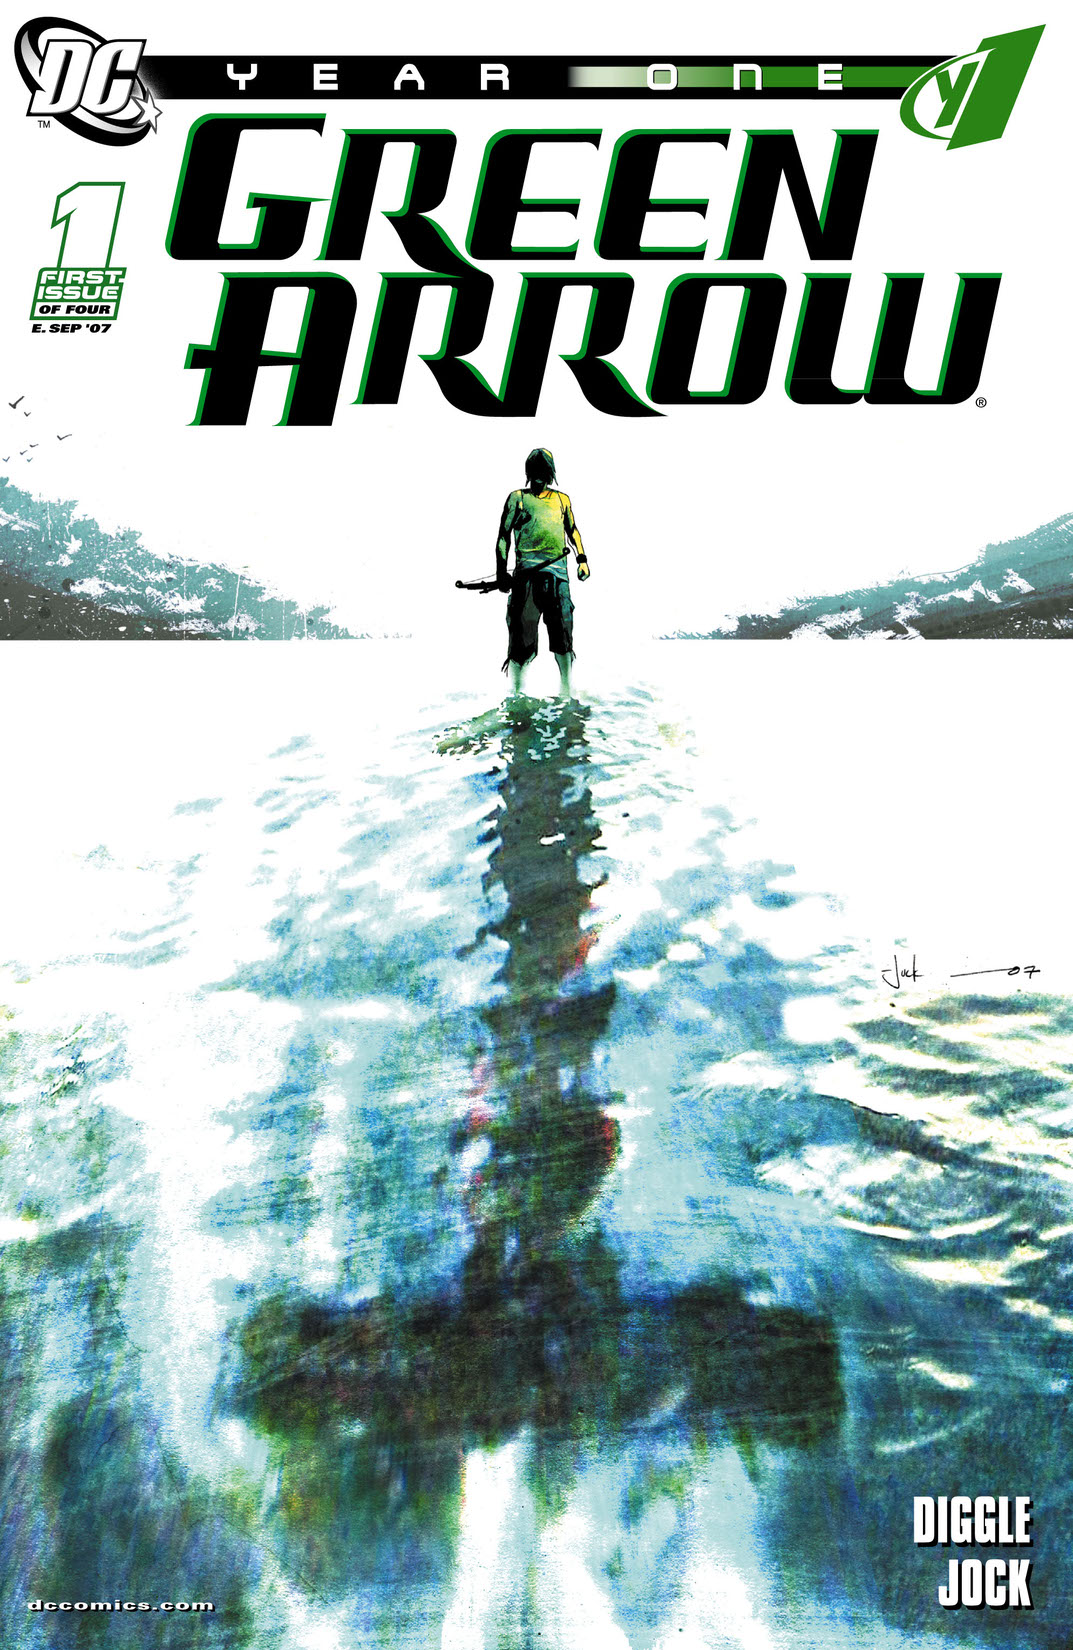 Green Arrow: Year One #1 preview images